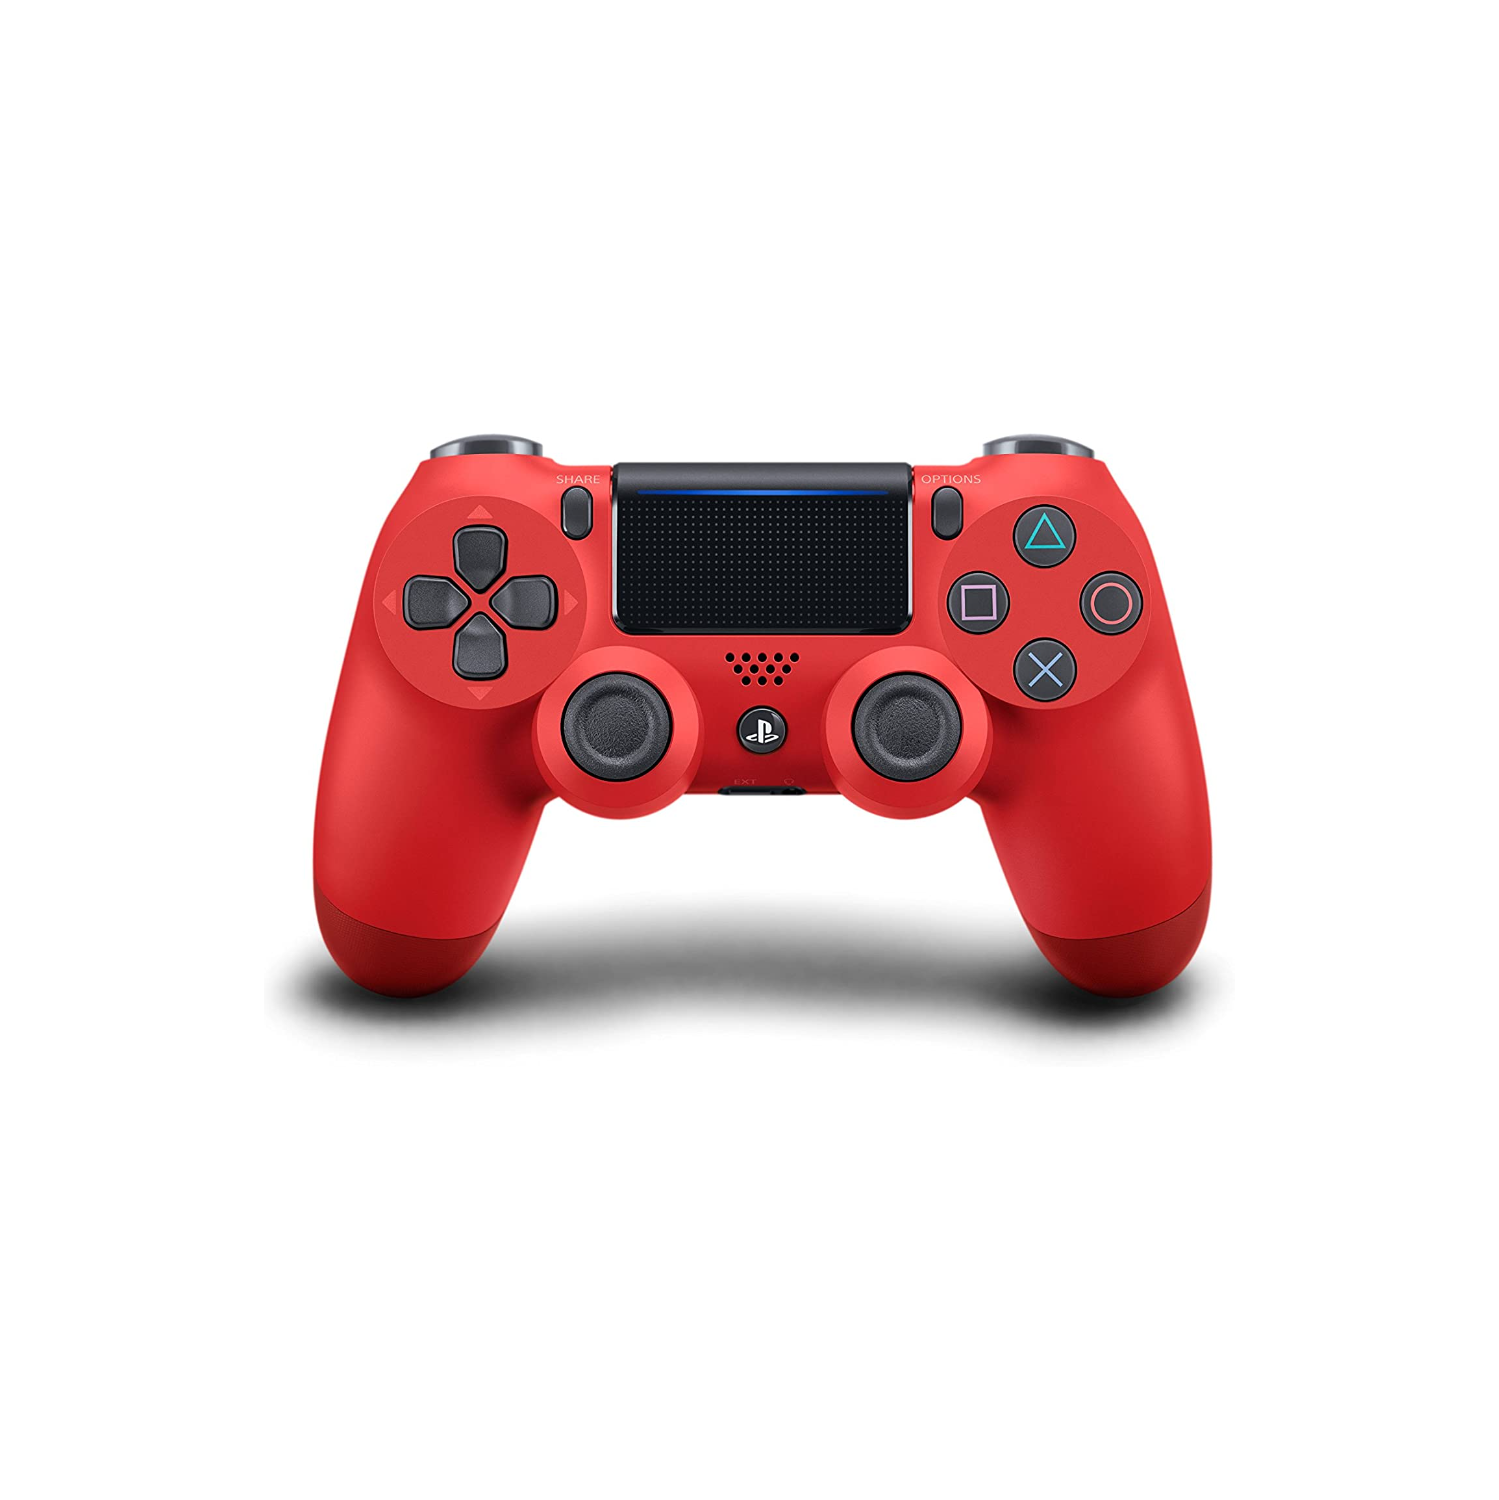 Open Box Sony DualShock PS4 Wireless Controller Joystick for PS4 with Charging Cable (Magma Red)